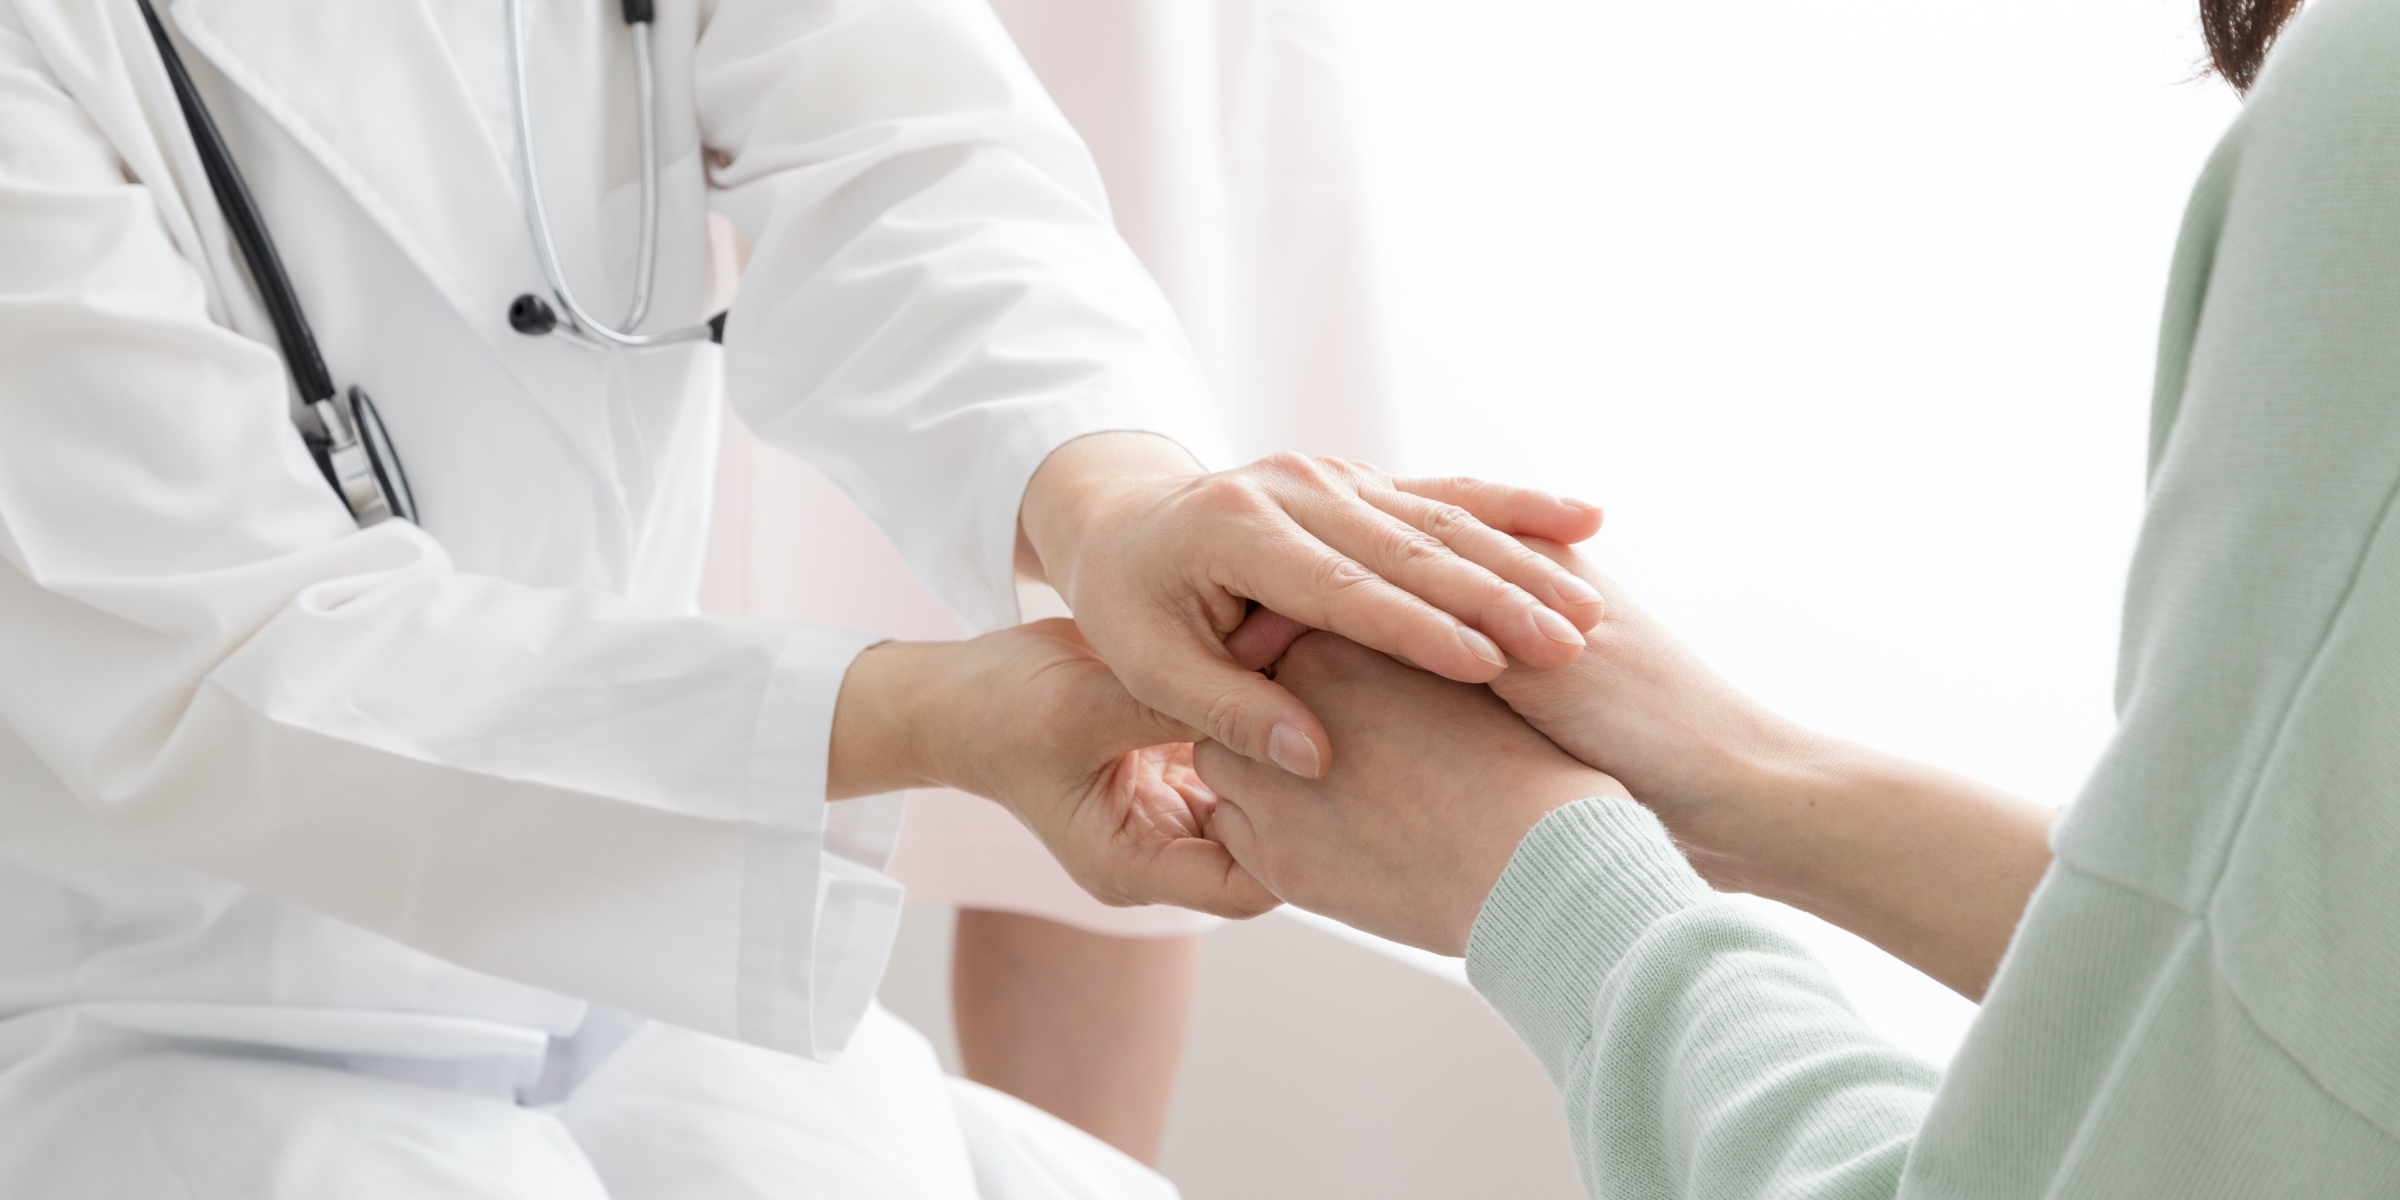 Doctor holding a patient's hands